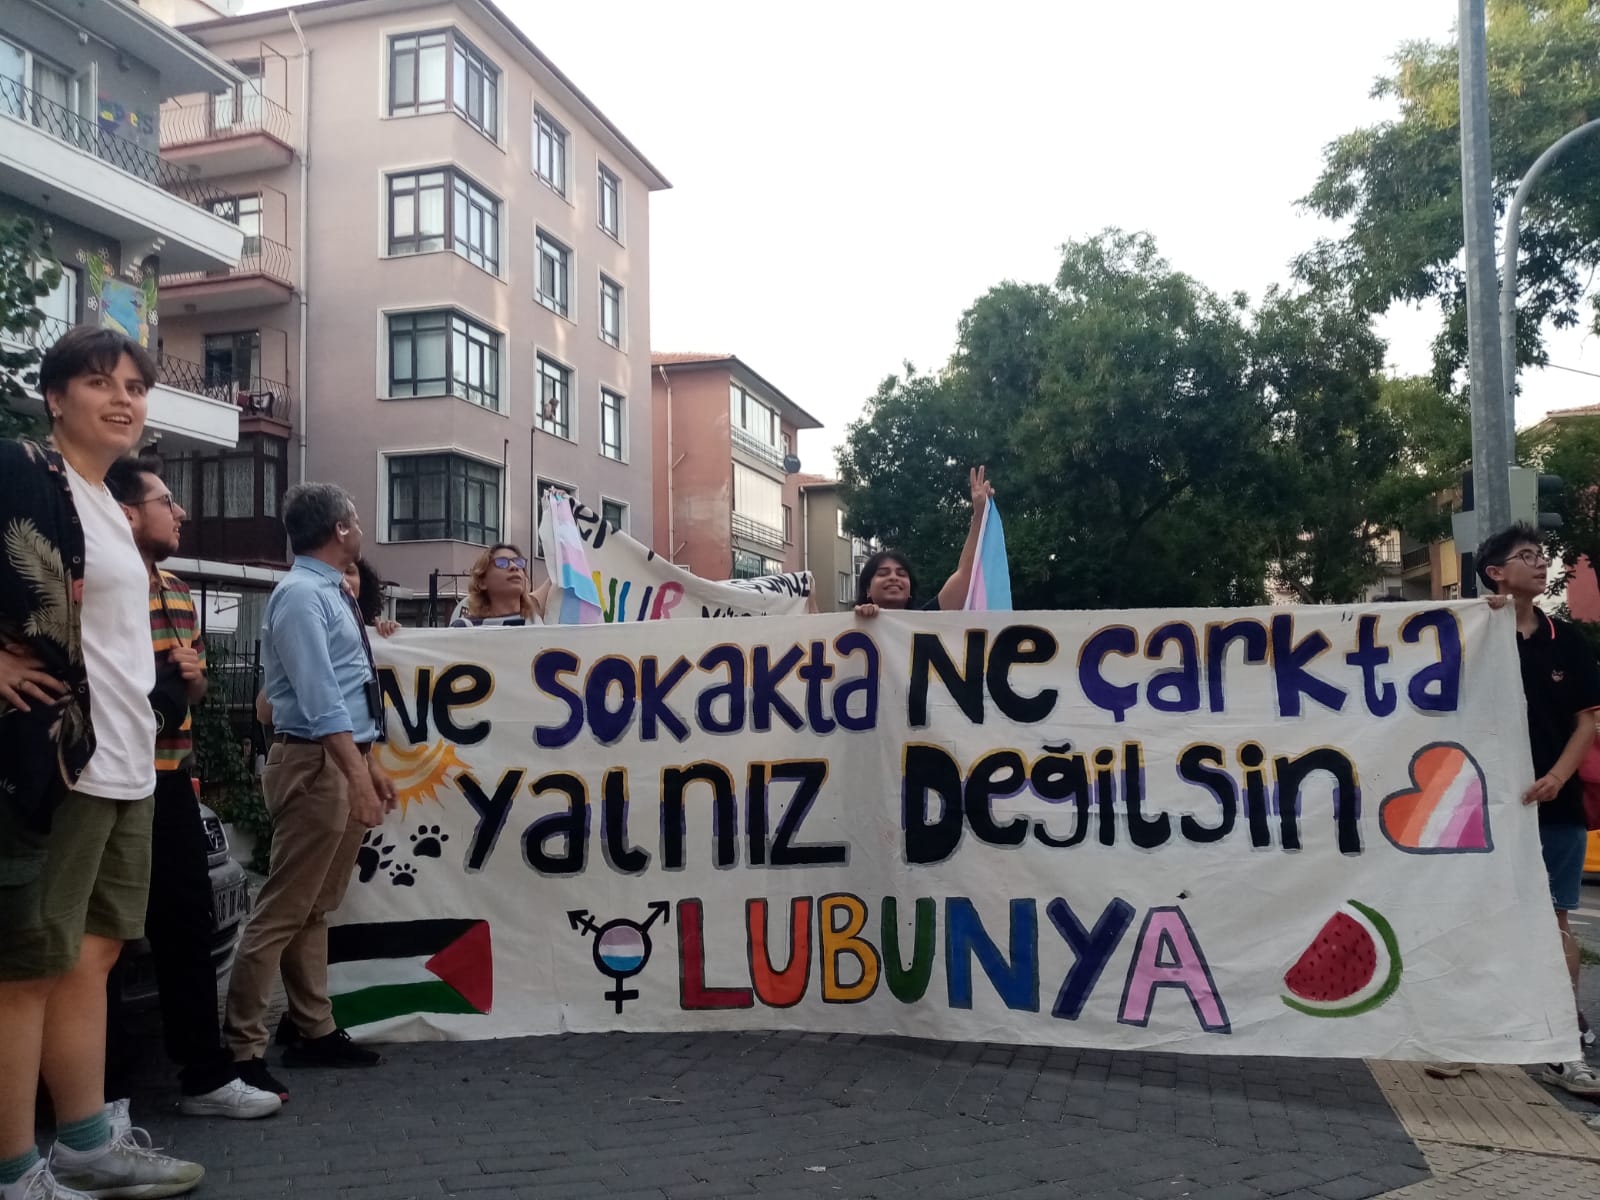 3rd Ankara Pride March was held: “We want all months, not only June!” | Kaos GL - News Portal for LGBTI+